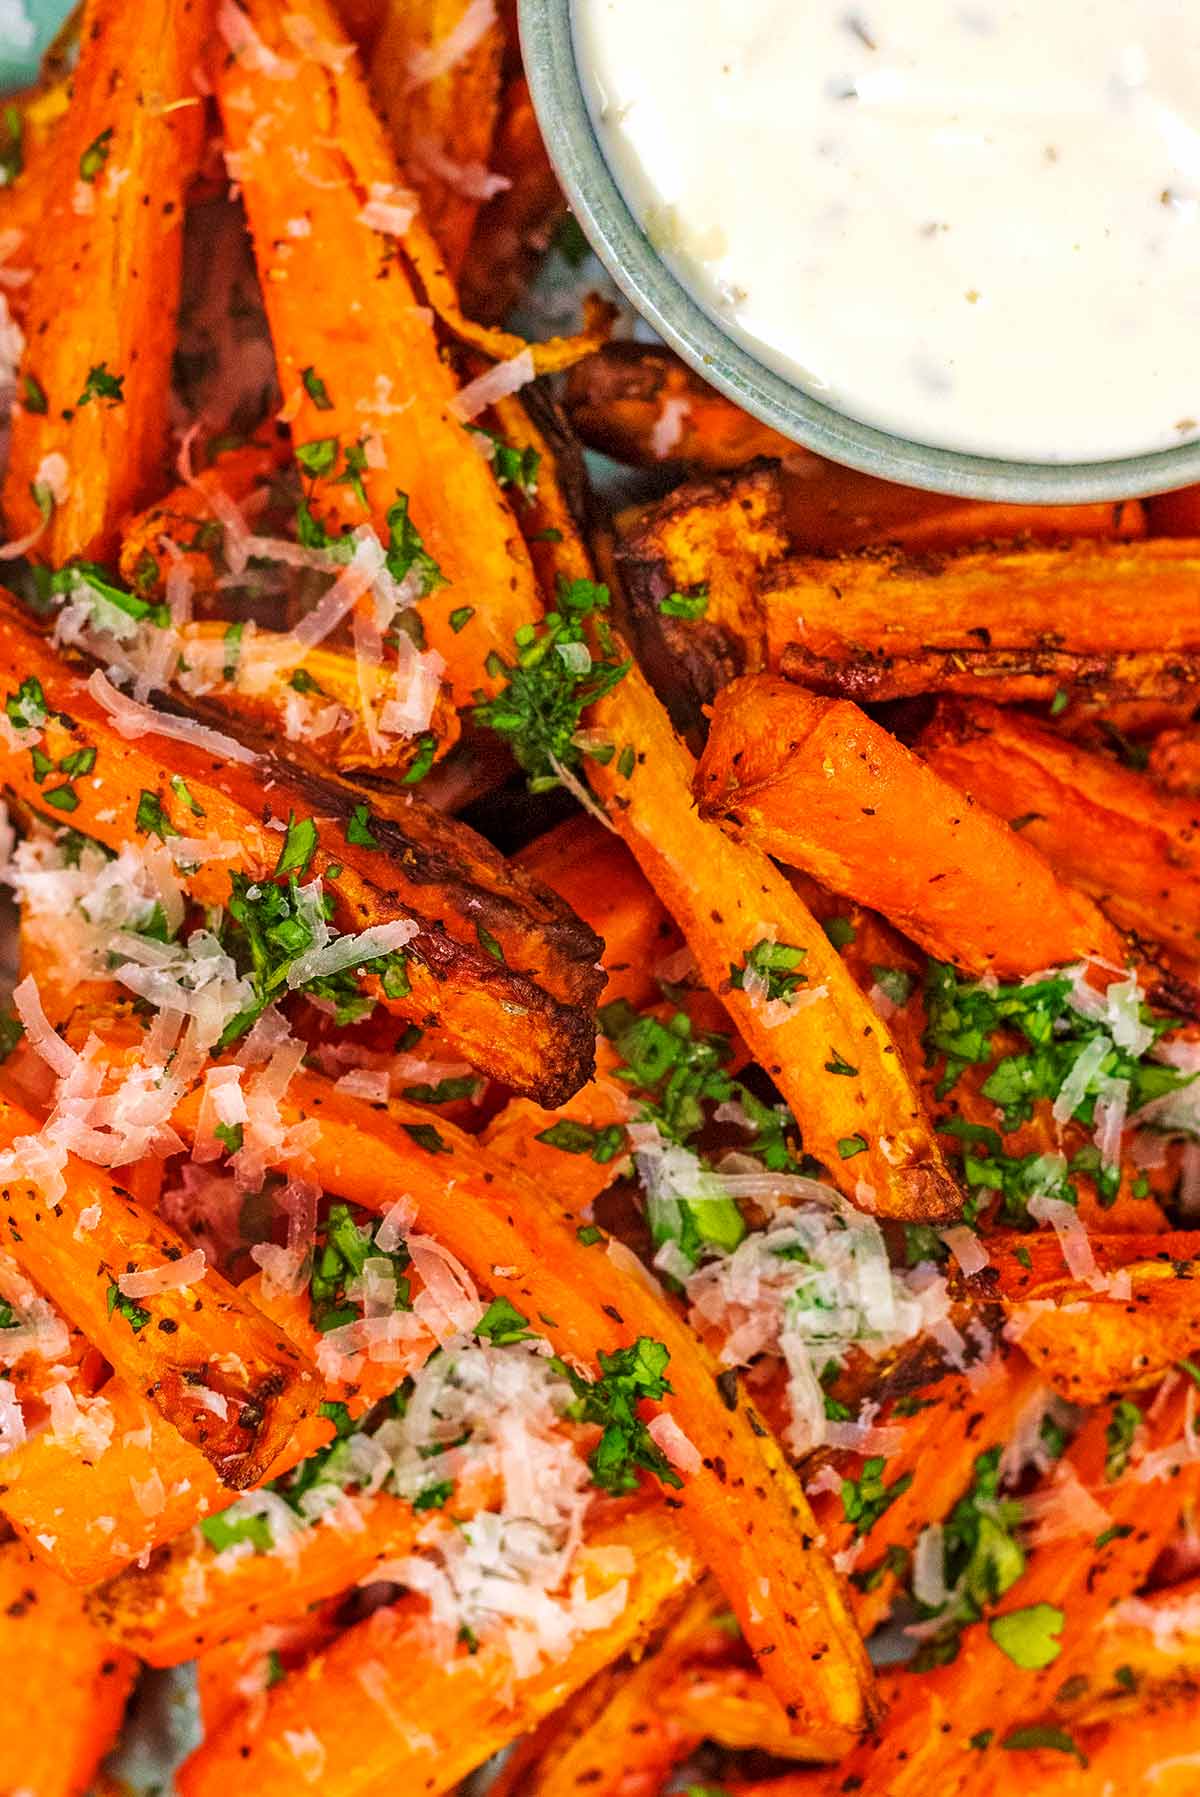 Cooked carrot battens topped with chopped herbs and finely grated cheese.